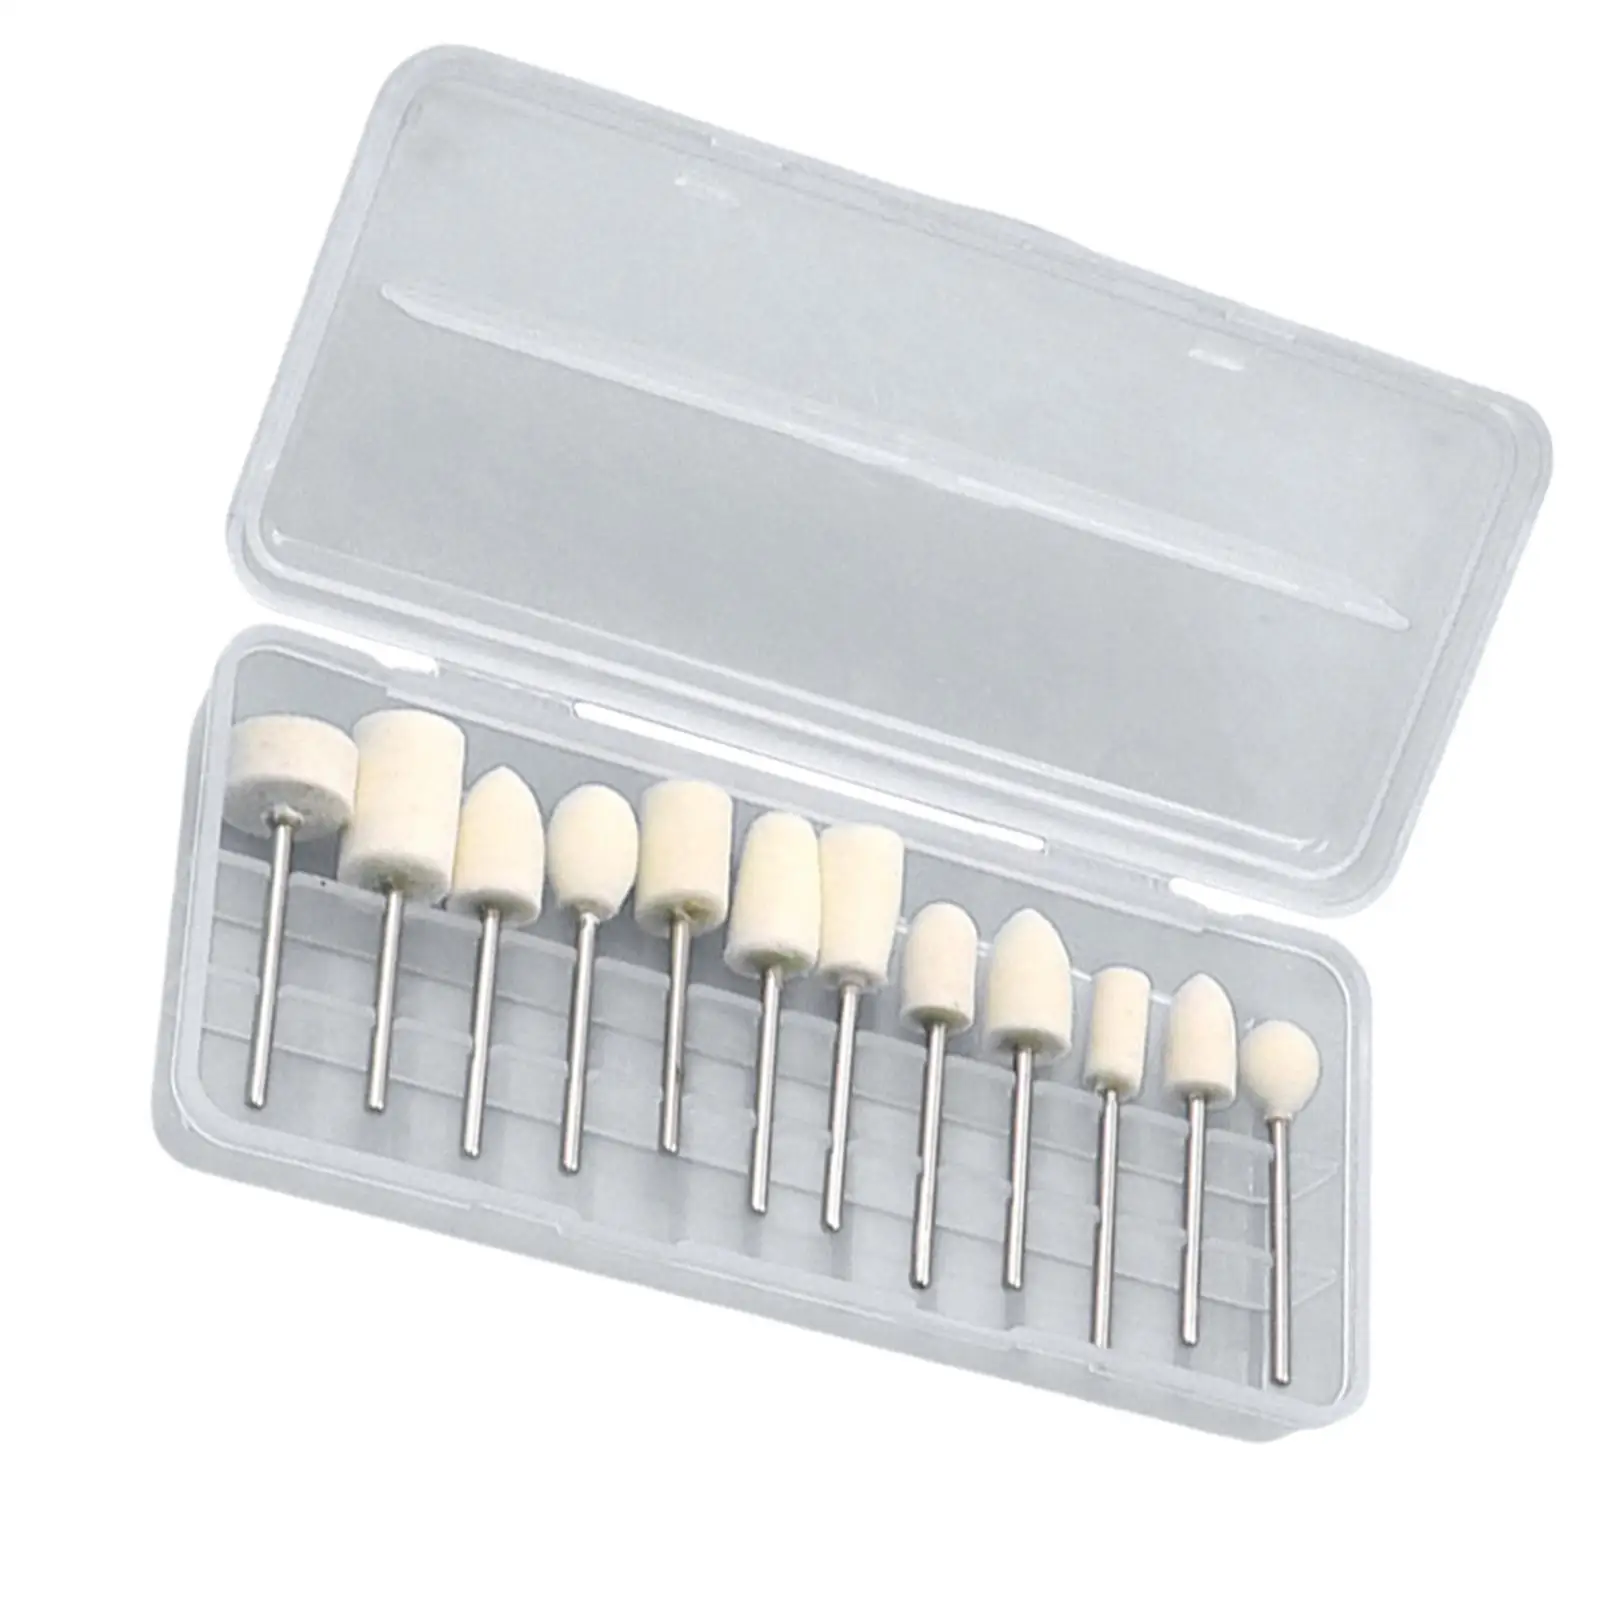 12x nail Grinding Polishing Head Kit with Case Grinding Barrel Head for Nail Art